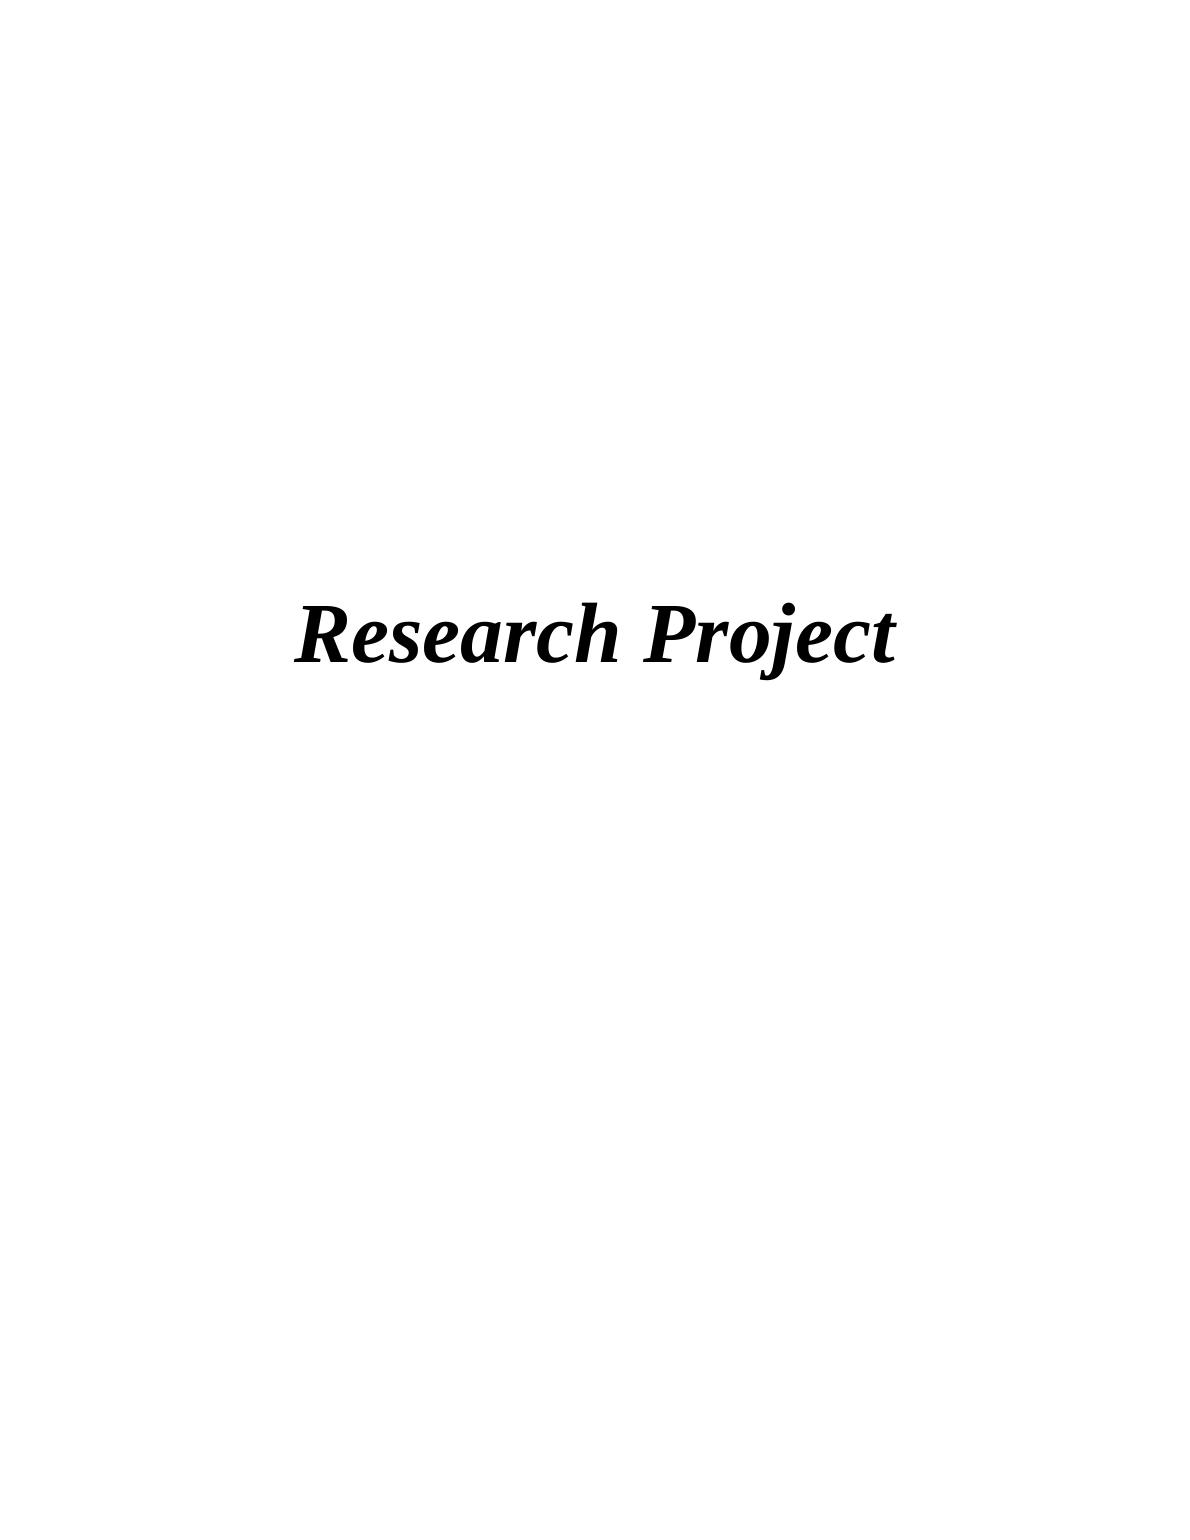 Research Project TASK1 3 1.1 Introduction 3 1.2 Factors that contribute into the research project selection 3 1.1 Introduction 3 1.2 Research Project specification 5 1.5 Gantt chart 6 TASK 1 3 1.1 Int_1